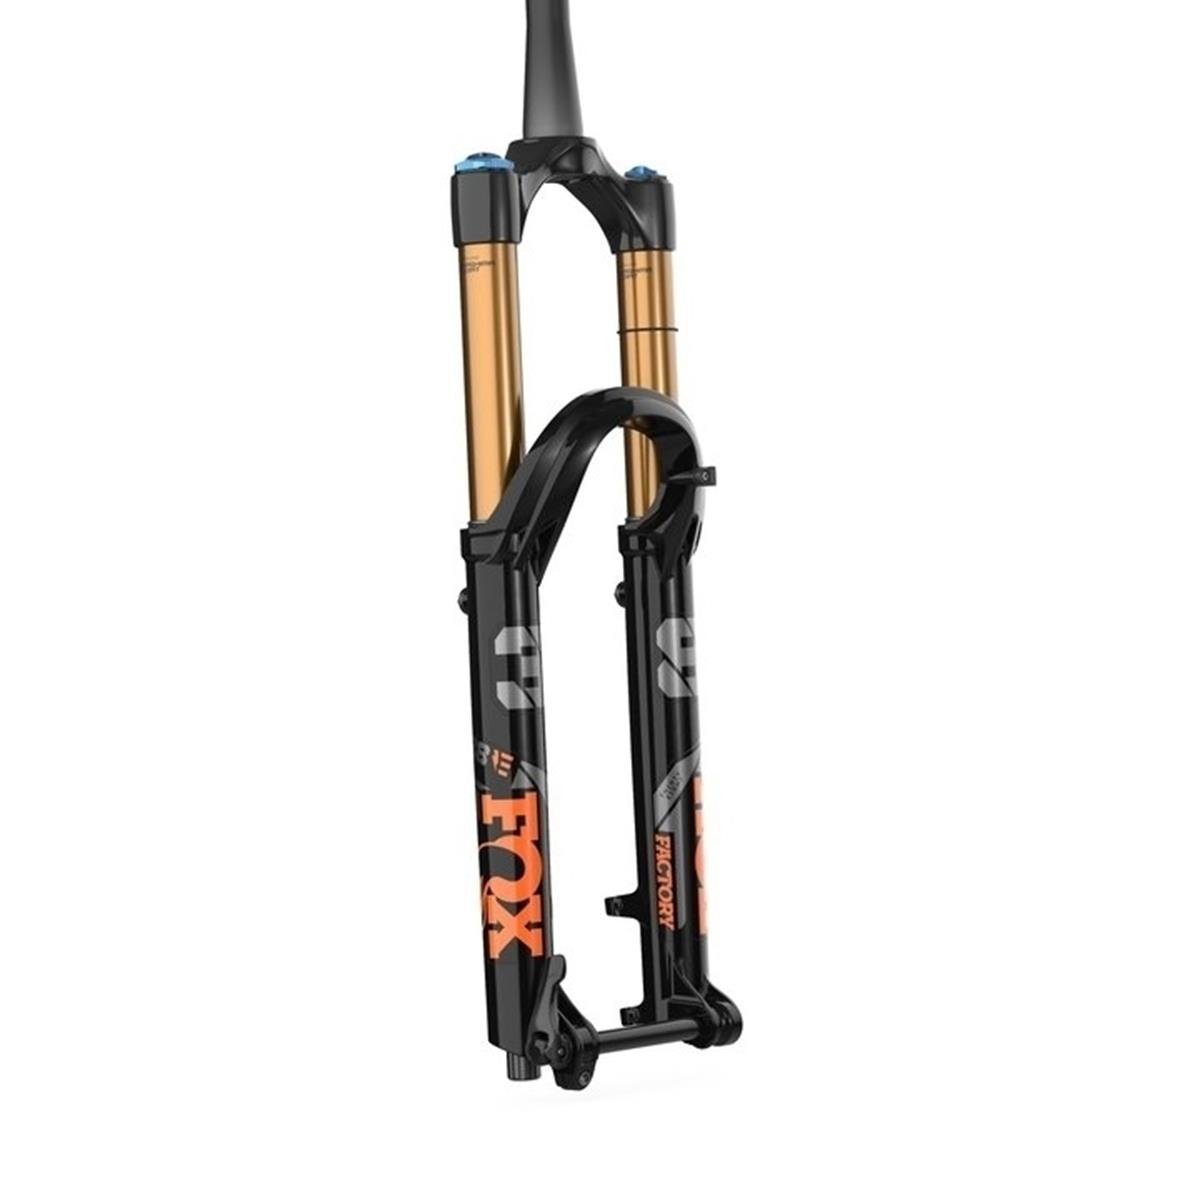 Fox Racing Shox Suspension Fork 38 Float Factory E-Bike+ 27.5 Inches, 15x110 mm, GRIP 2, 44 mm Offset, 170 mm